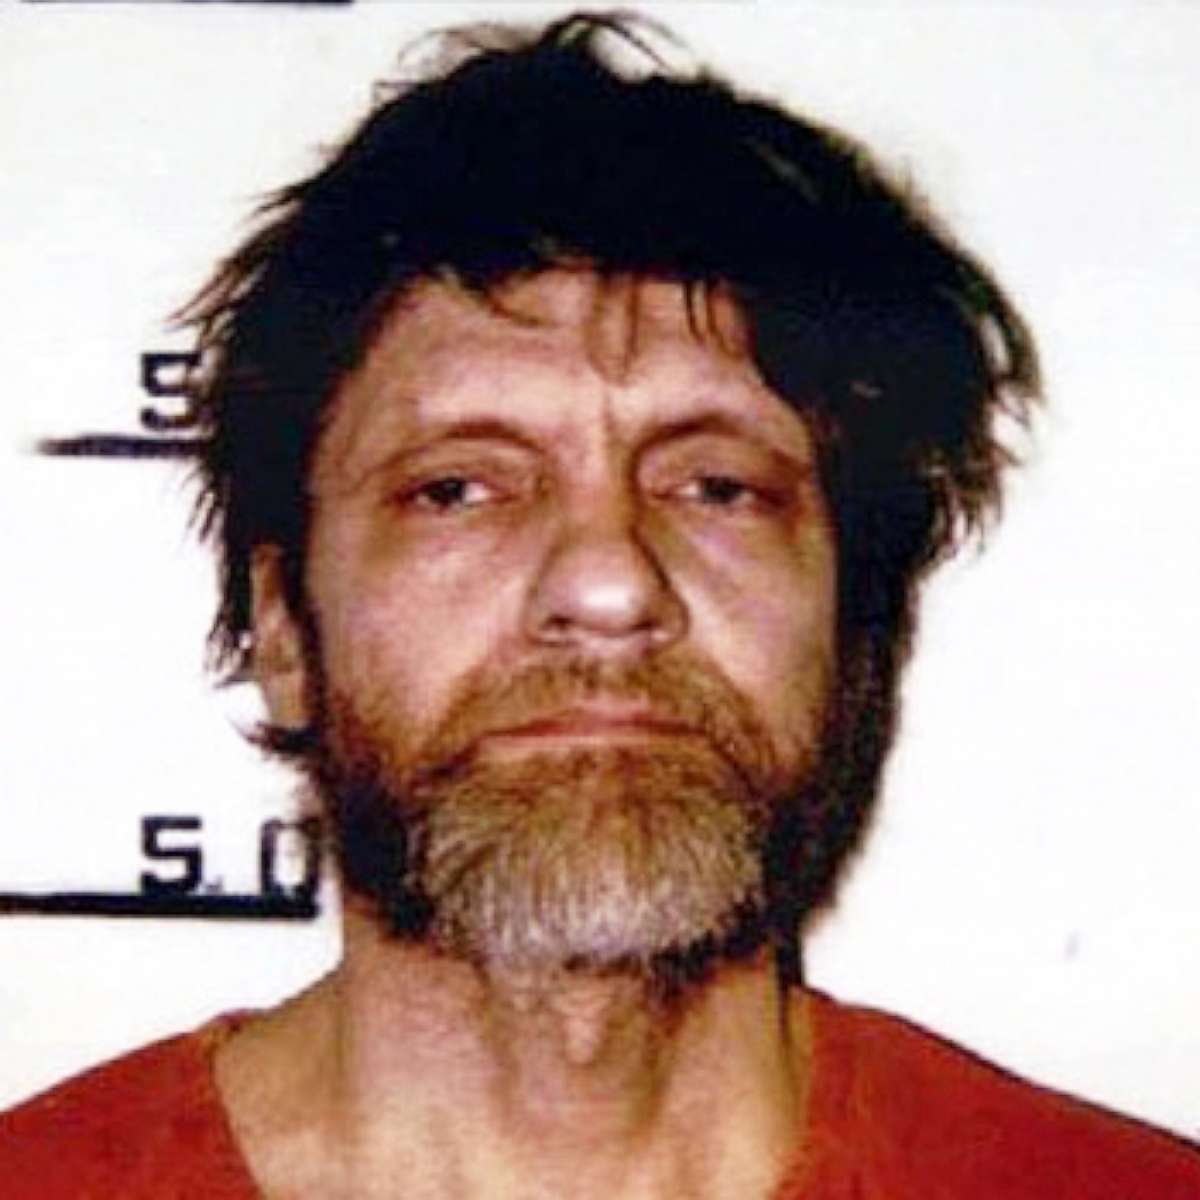 PHOTO: Theodore Kaczynski is pictured his booking photo from April 1996.